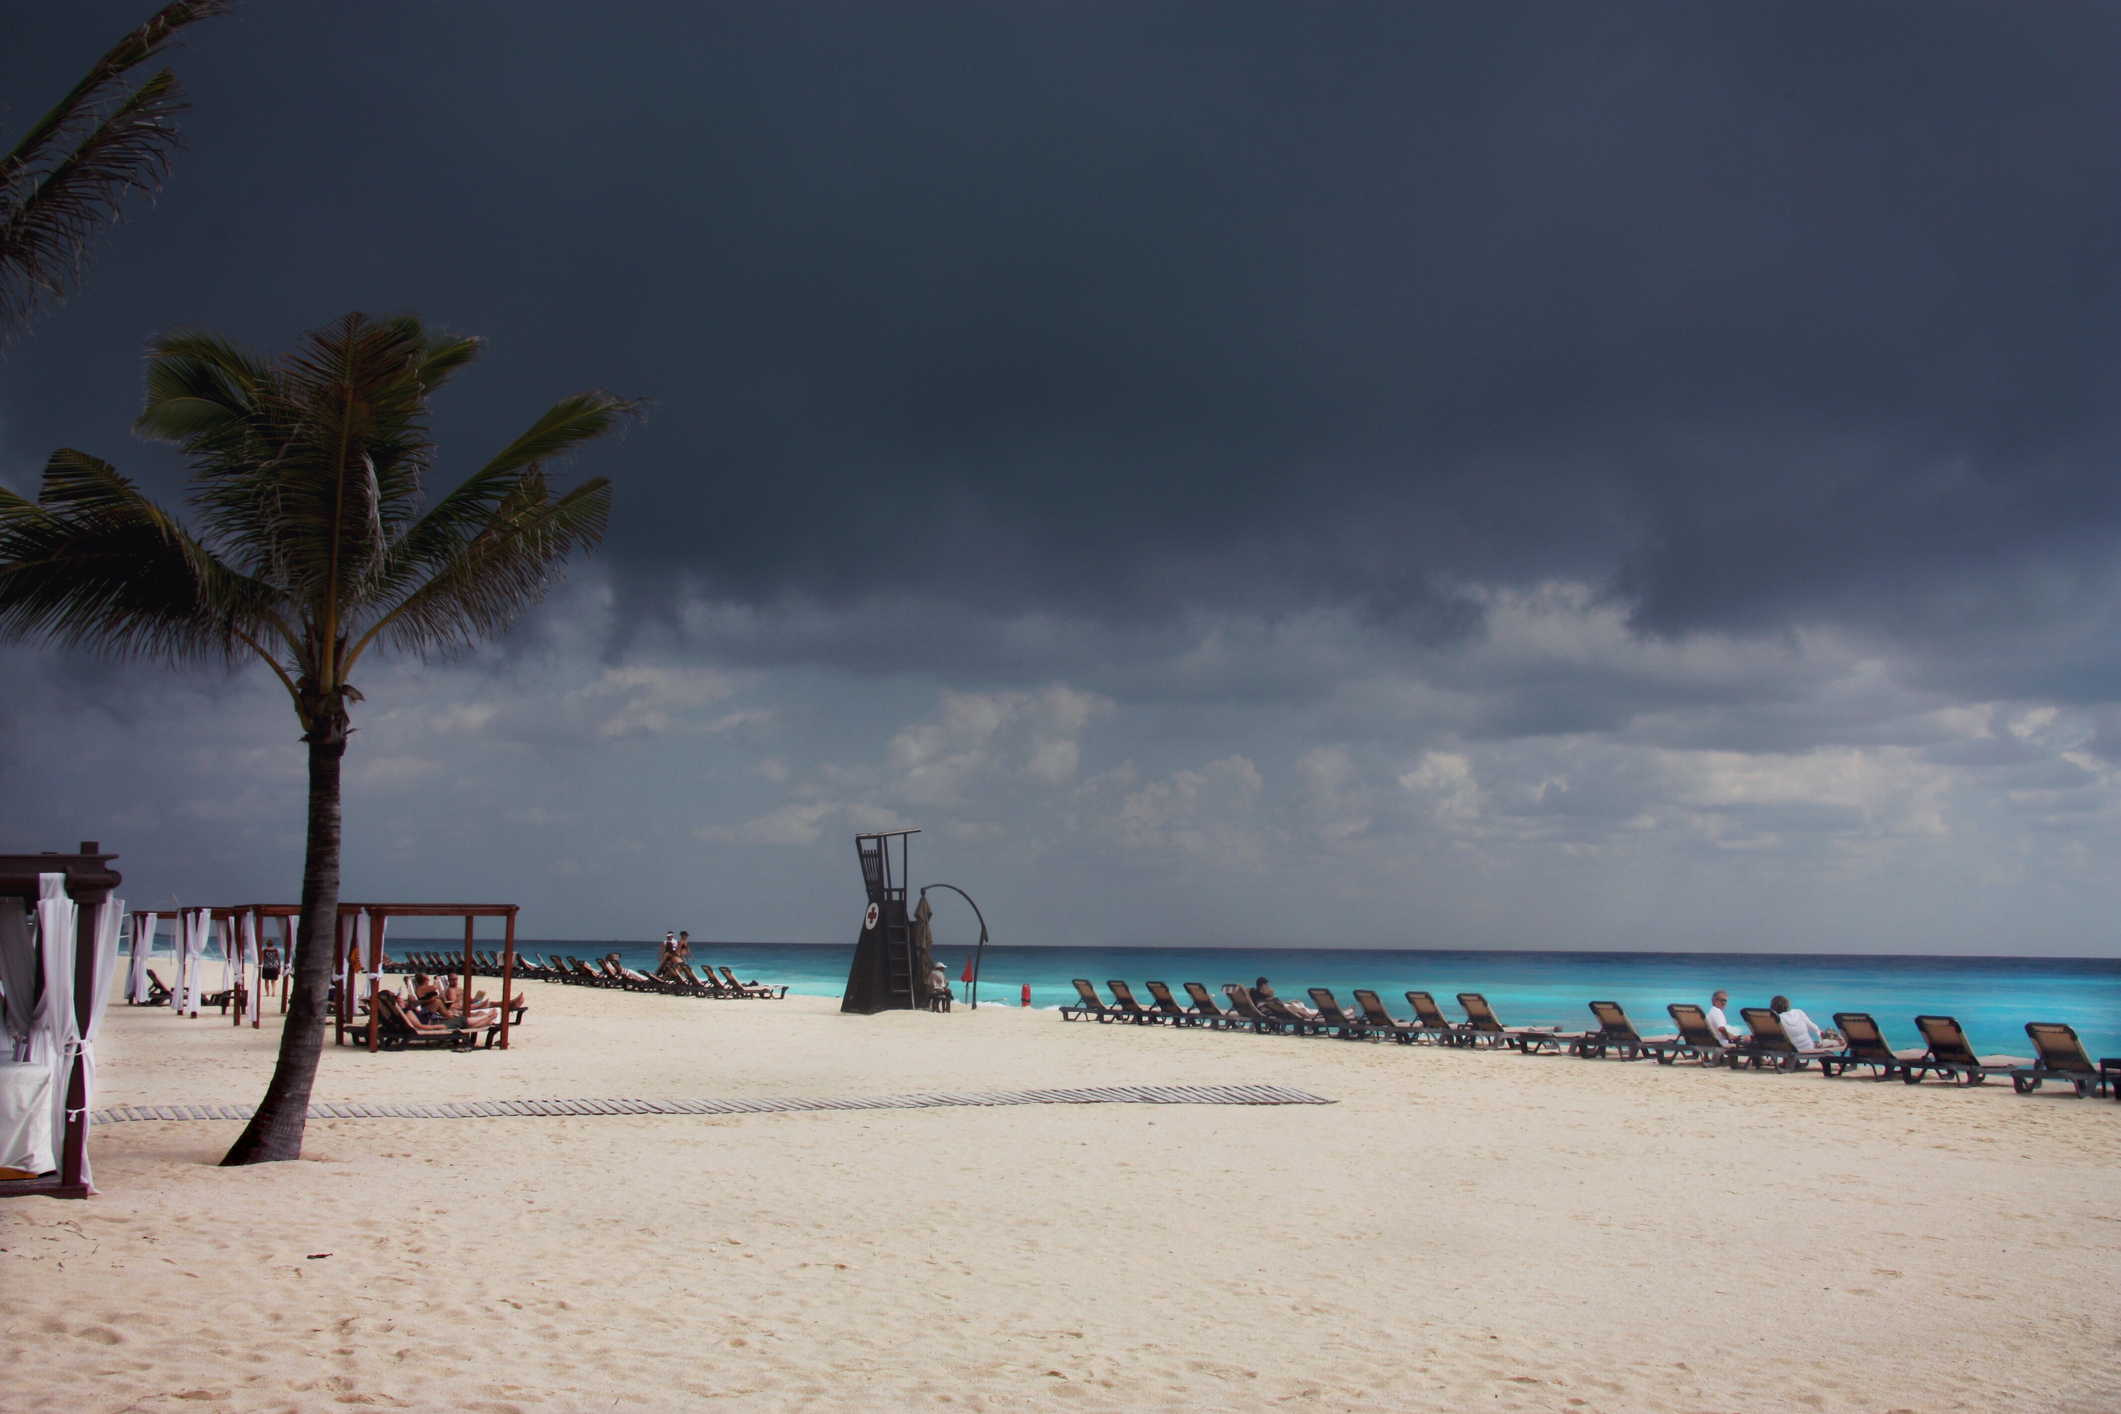 A storm approaches Cancun, Mexico.